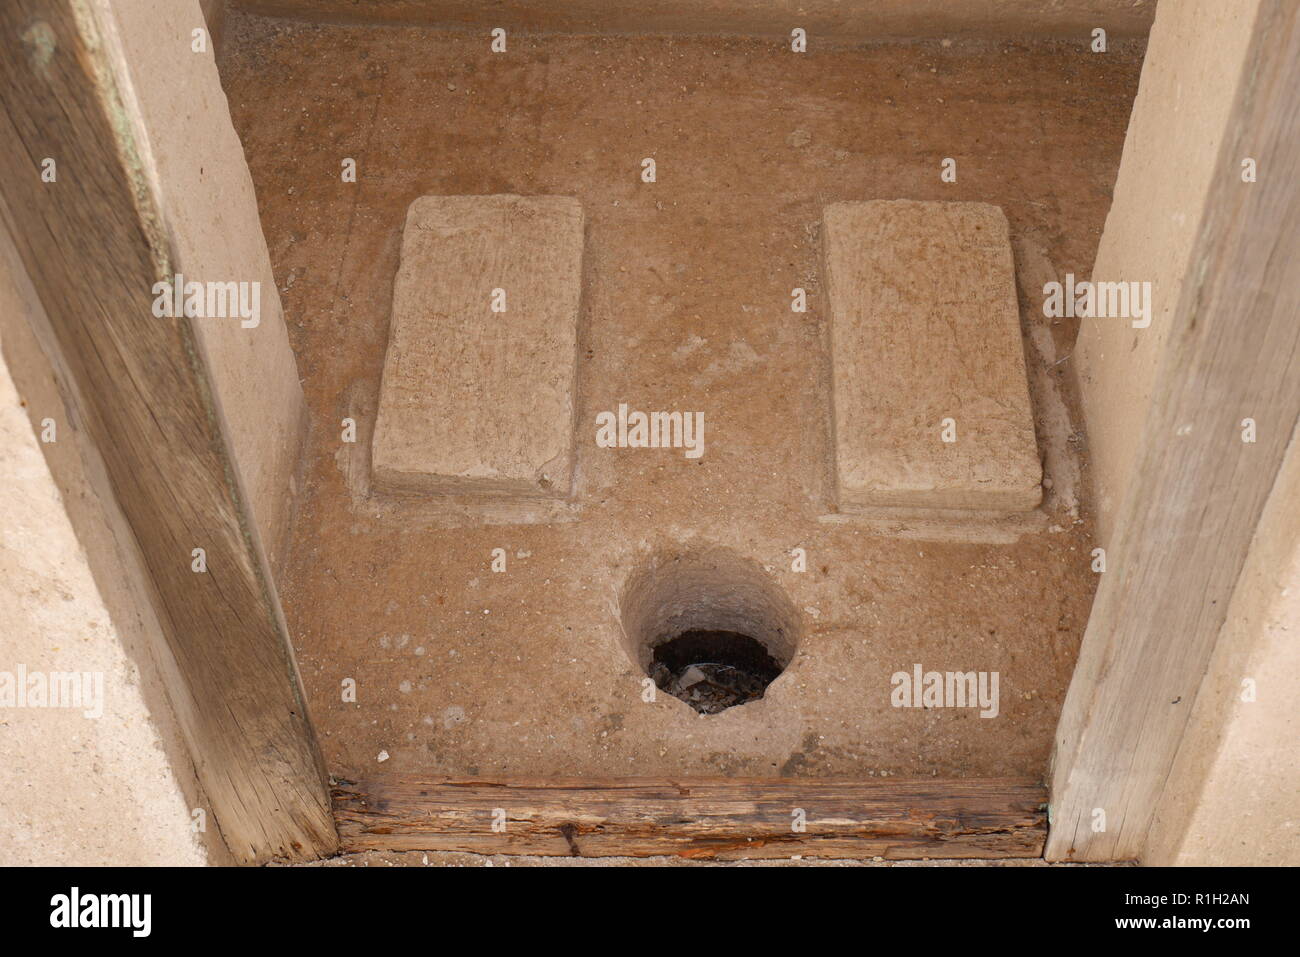 Hole in the floor, squat toilet, Al Alawi House, located on the Pearl Trail, Muharraq, Kingdom of Bahrain Stock Photo